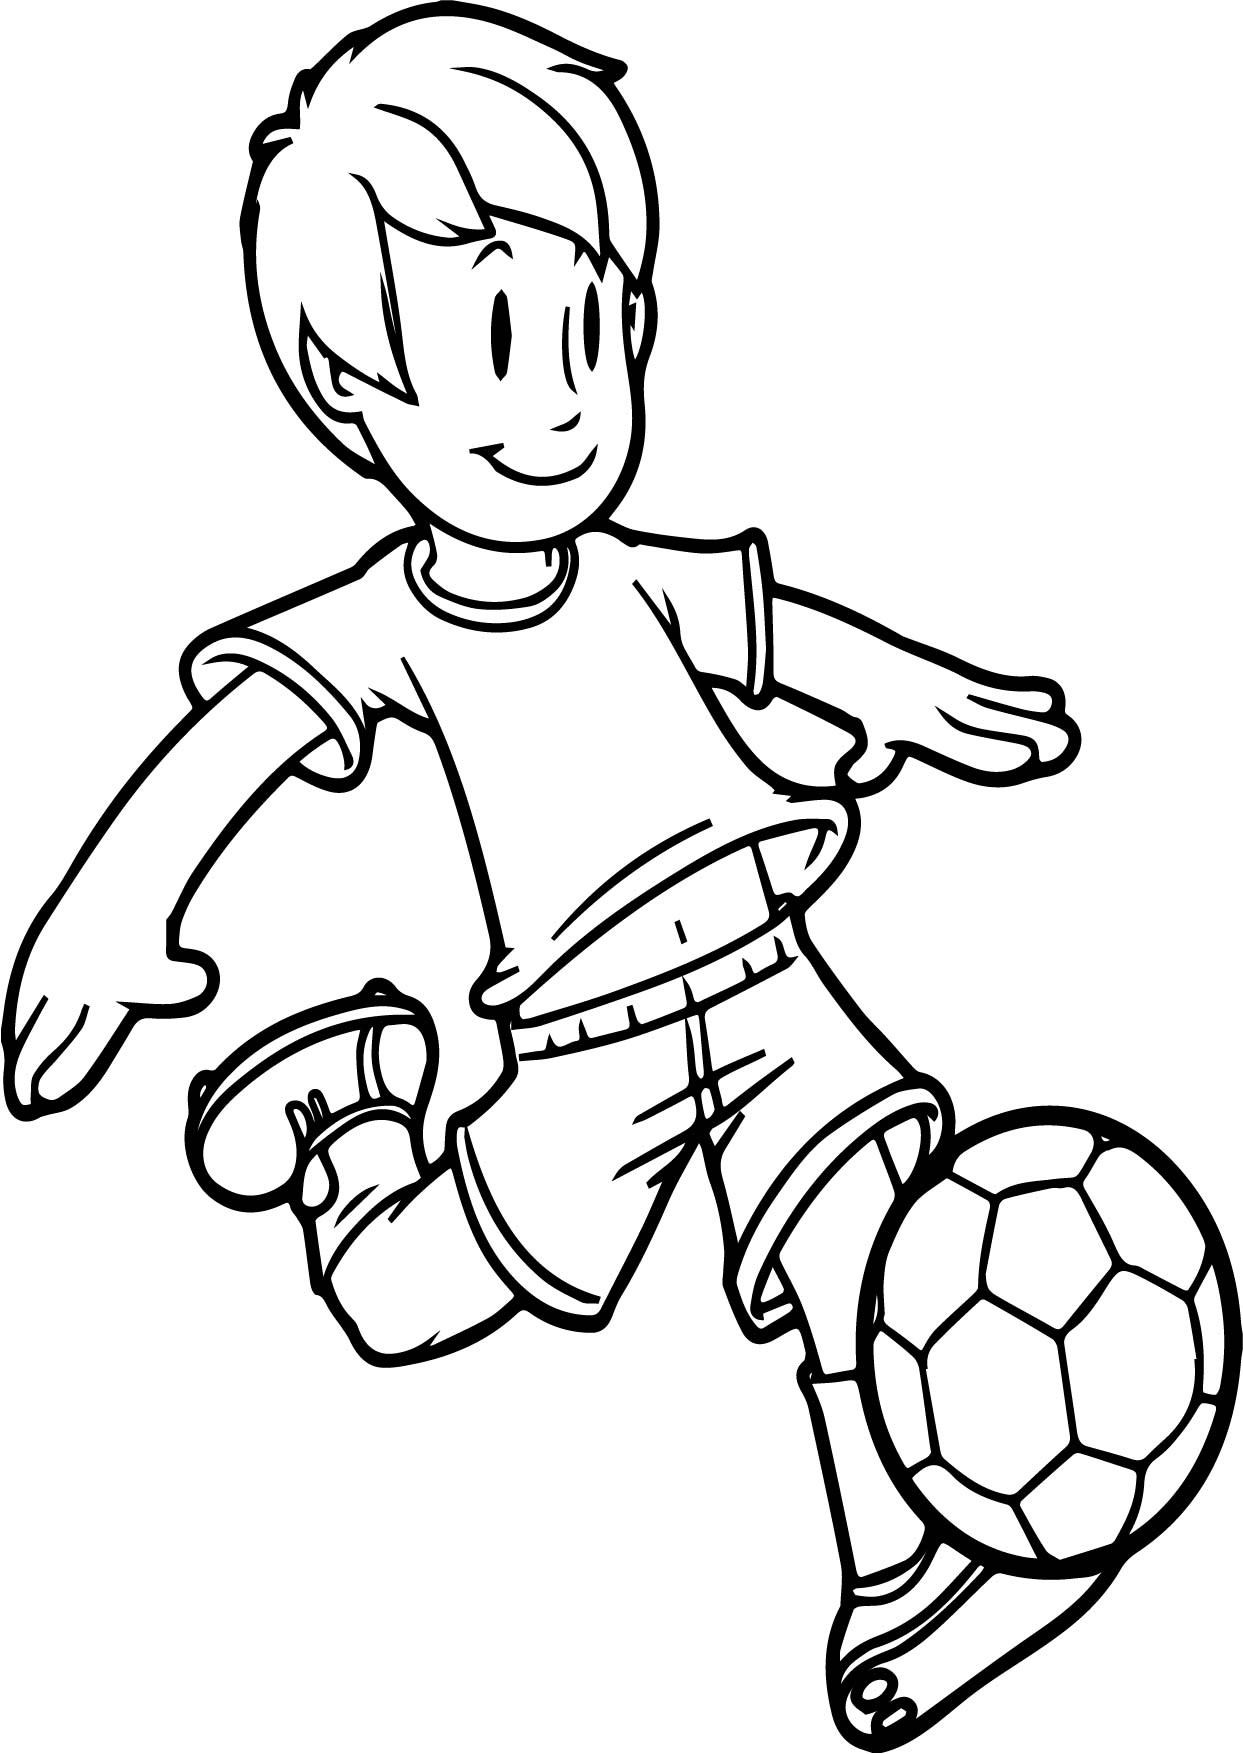 Coloring Pages For Boys Easy
 Soccer Drawing at GetDrawings